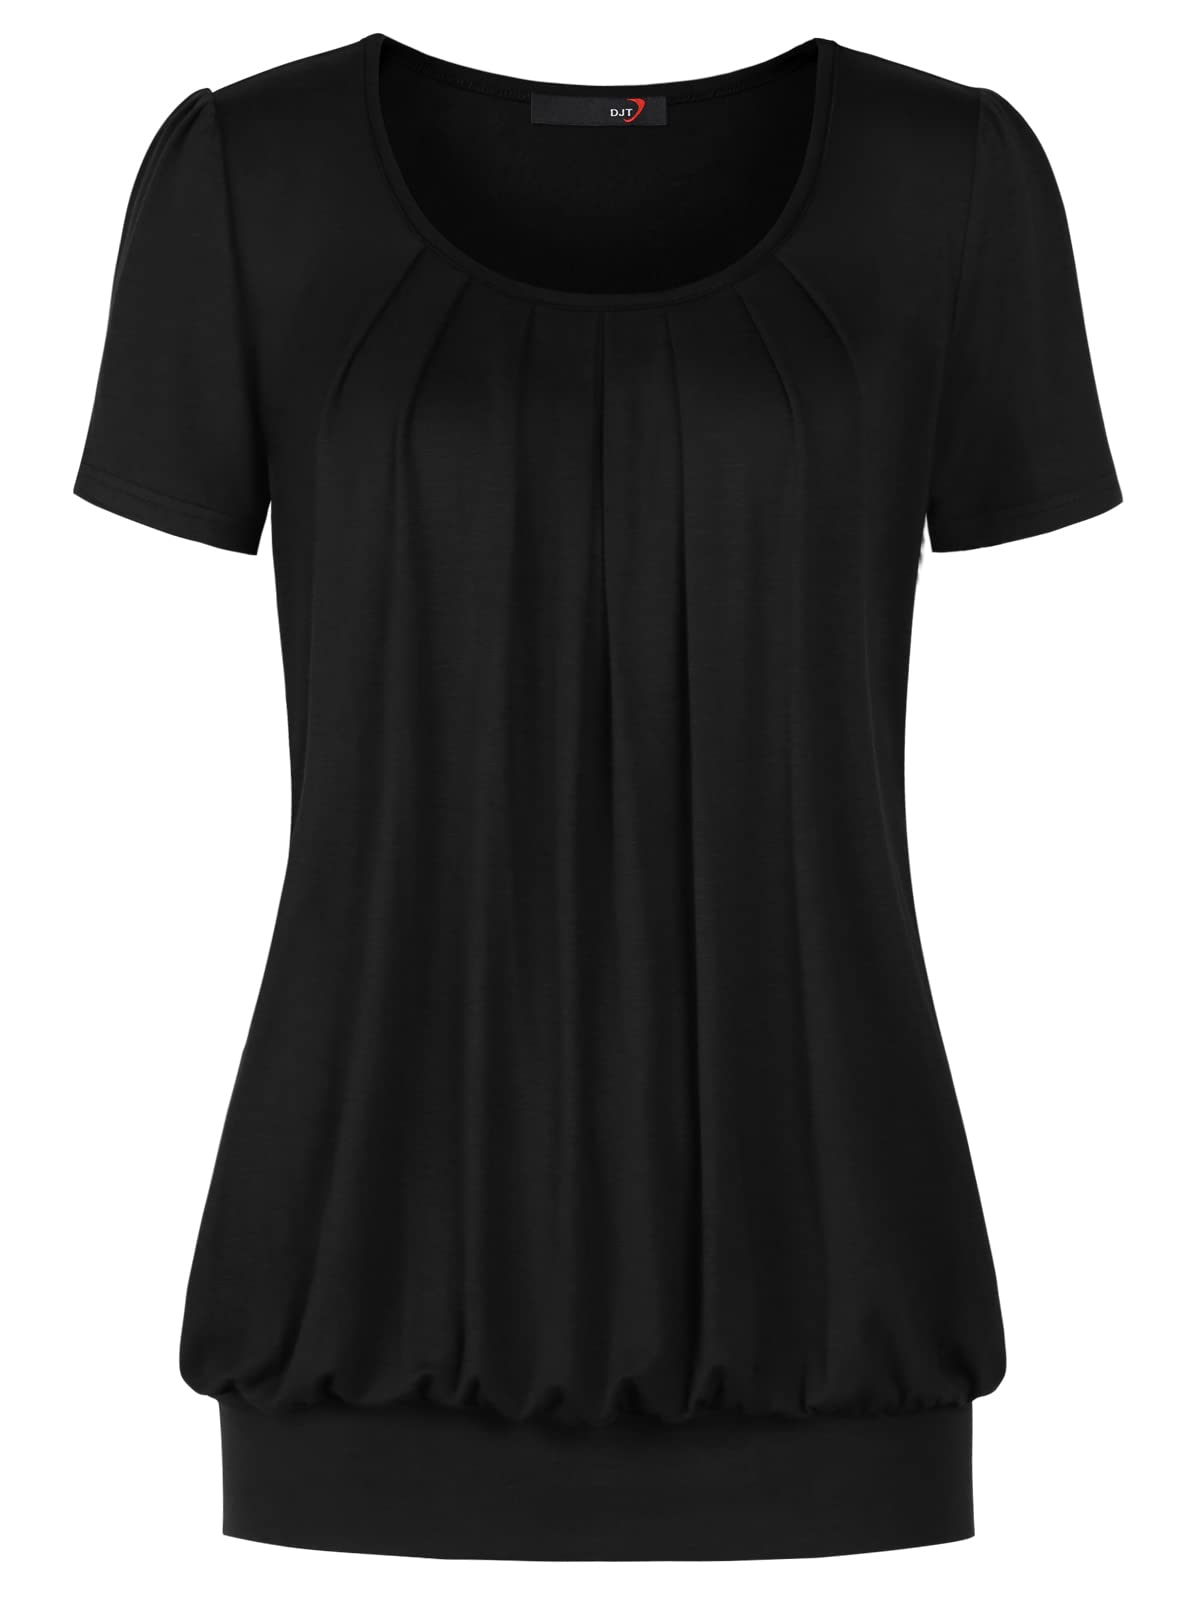 DJT Scoop Neck Black Short Sleeve Women's Pleated Front Blouse Tunic Tops